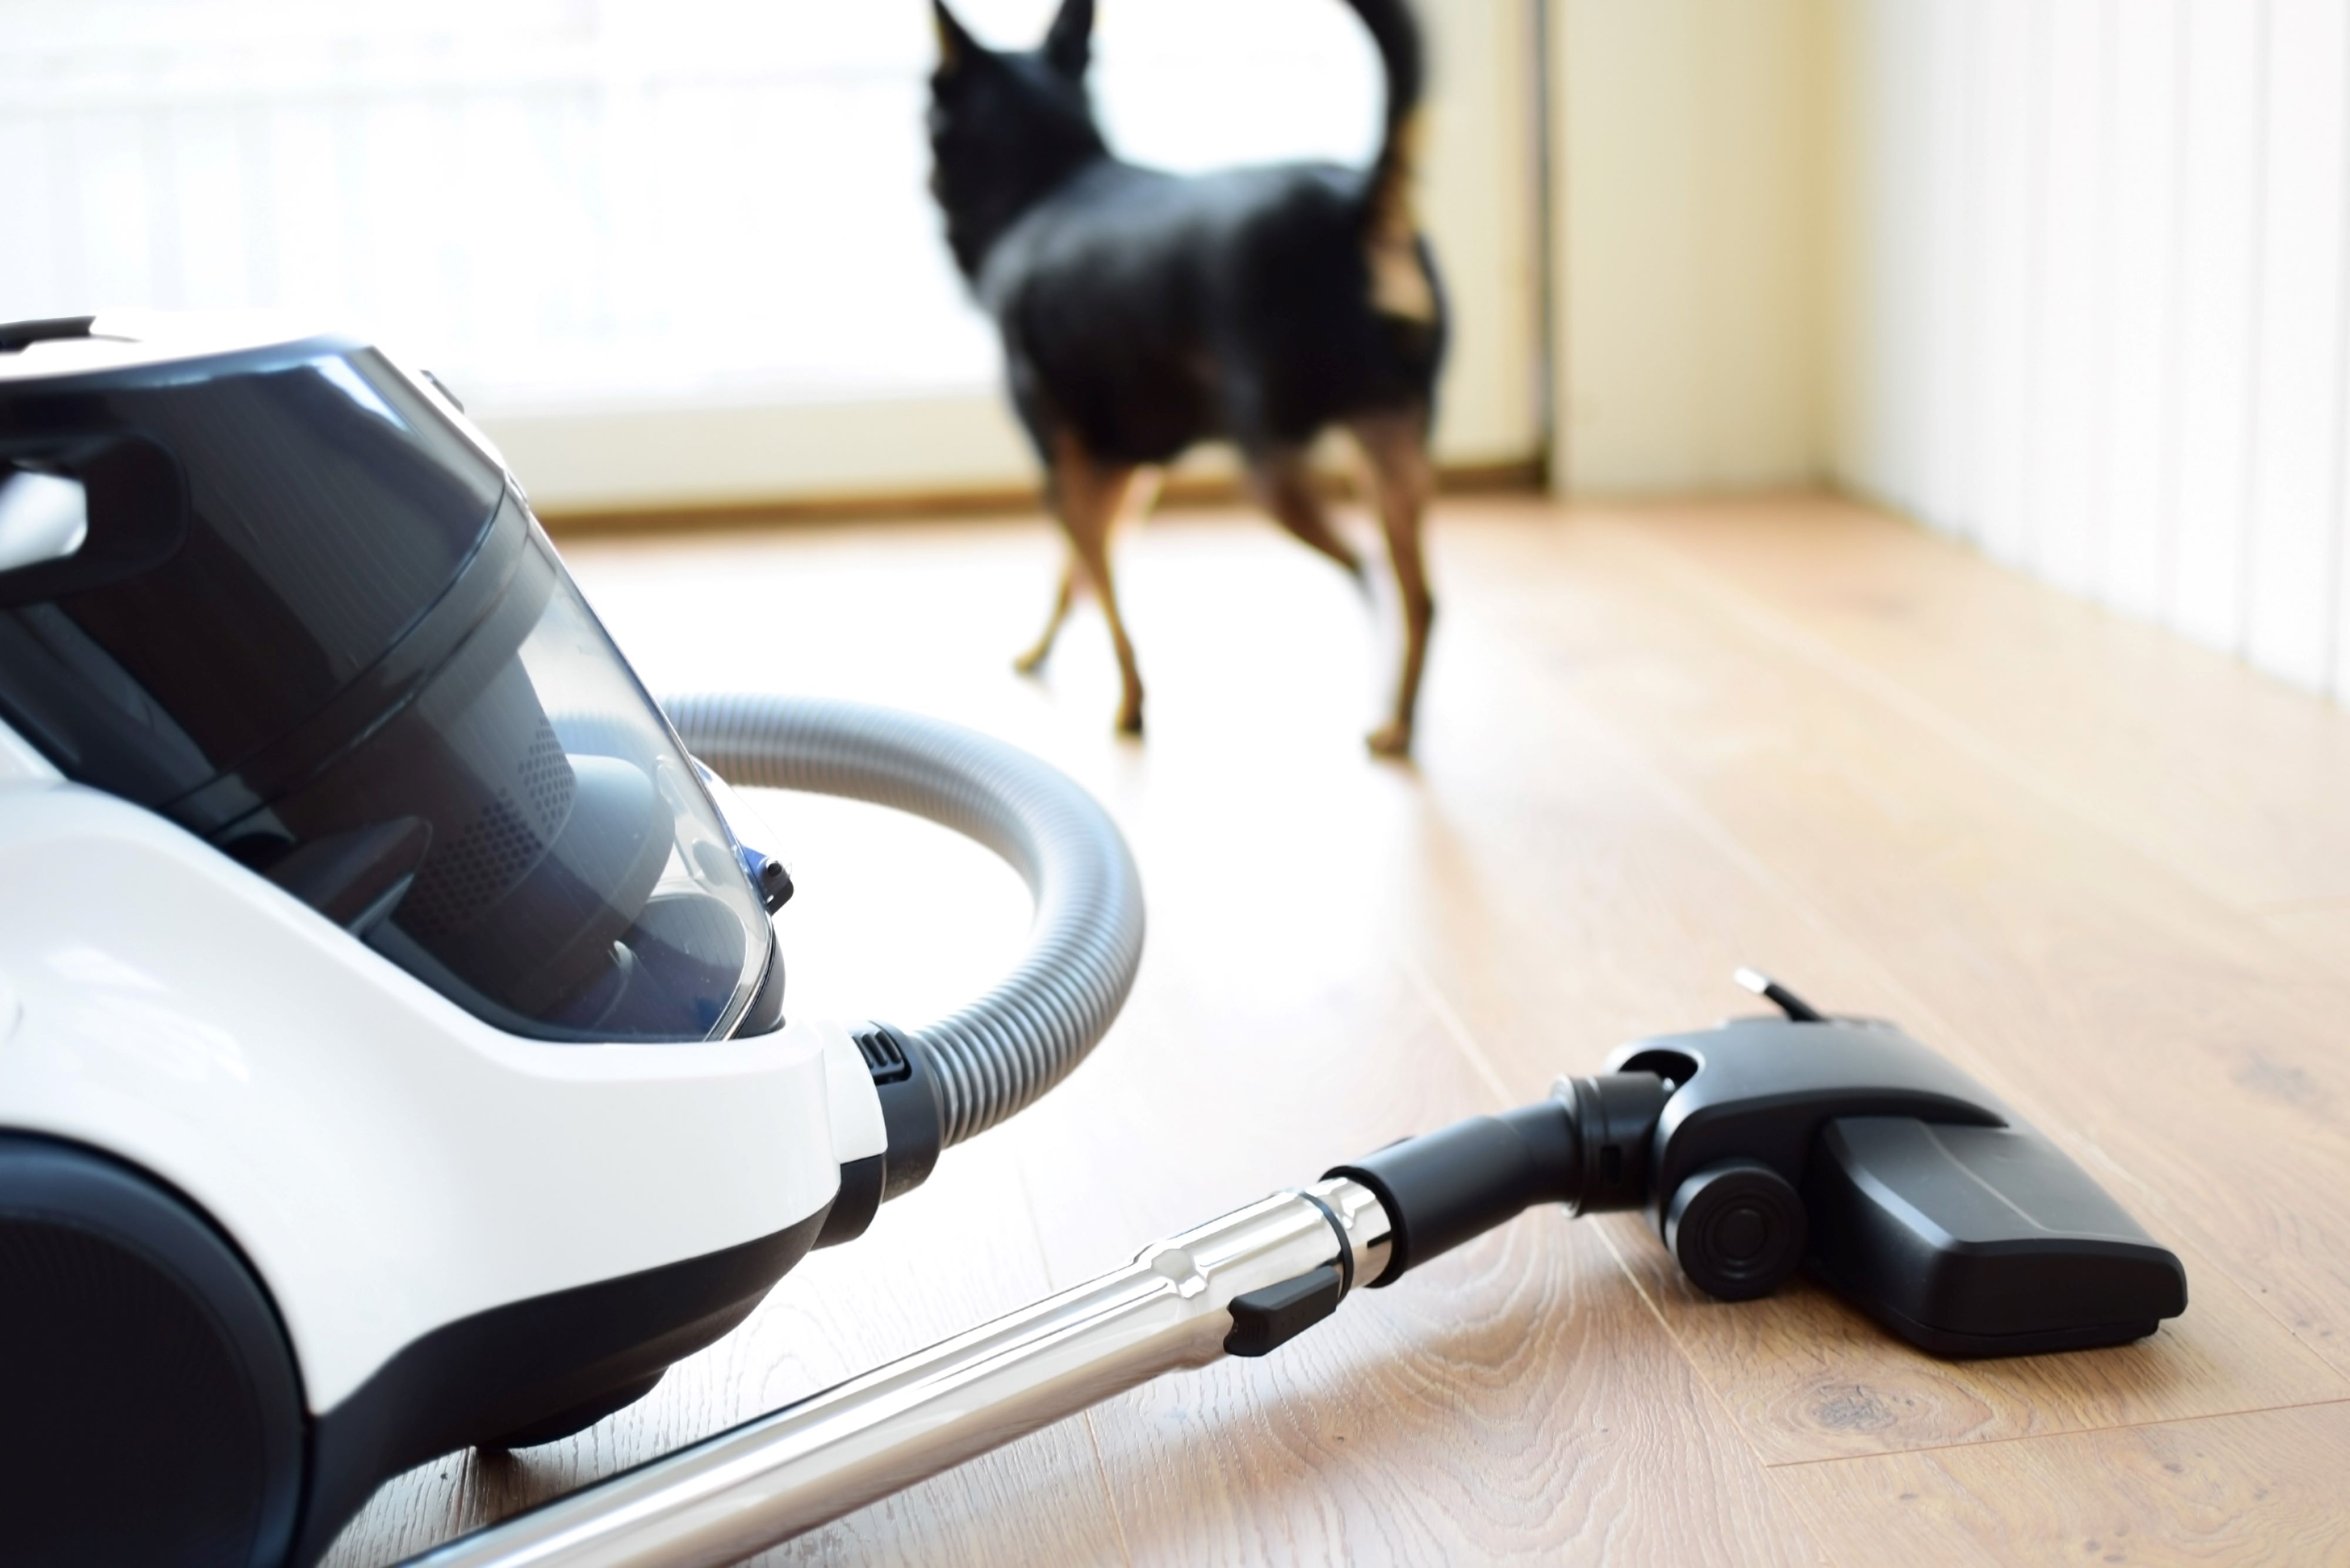 a canister vacuum used for pet hair in the foreground with a dog running away in the background